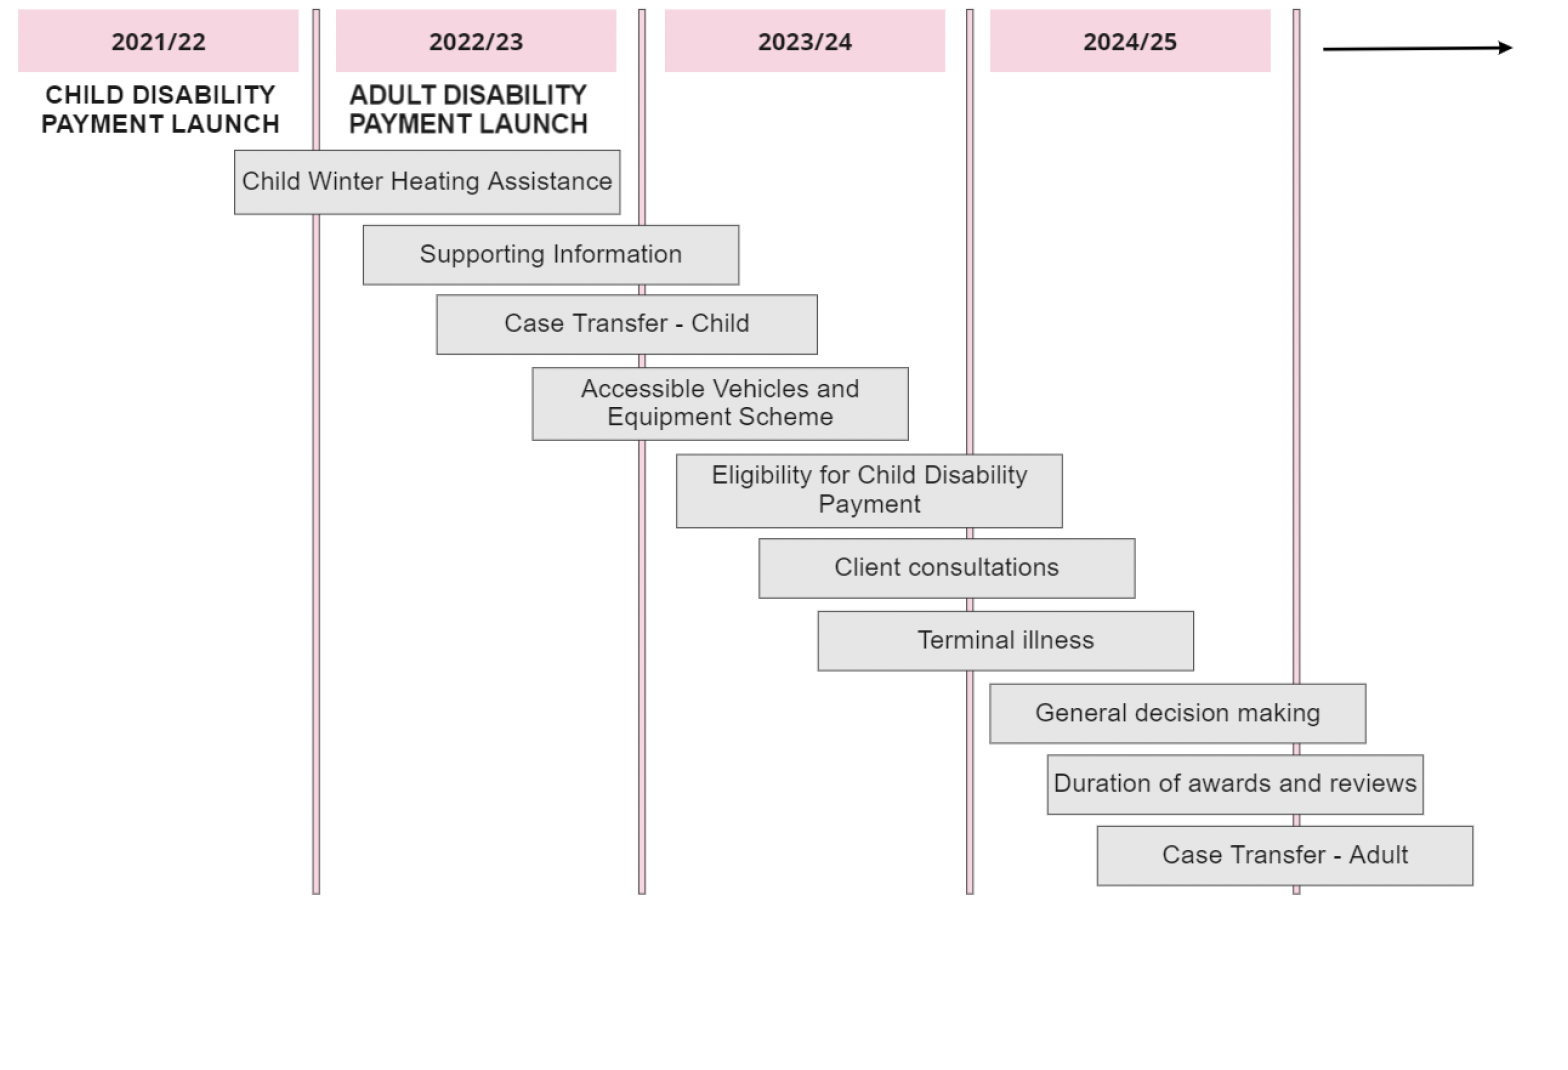 Figure 2 shows the probably phasing of evaluation activity which includes: Child Winter Heating Assistance (starting 2021/22); Supporting Information, Case Transfer Child Disability Payment and Accessible Vehicles and Equipment Scheme (starting 2022/23); Eligibility for Child Disability Payment, Client consultations, and Terminal illness (starting 2023/24); and General decision-making, Duration of awards and reviews and Case Transfer for Adult Disability Payment (stating 2024/25). 